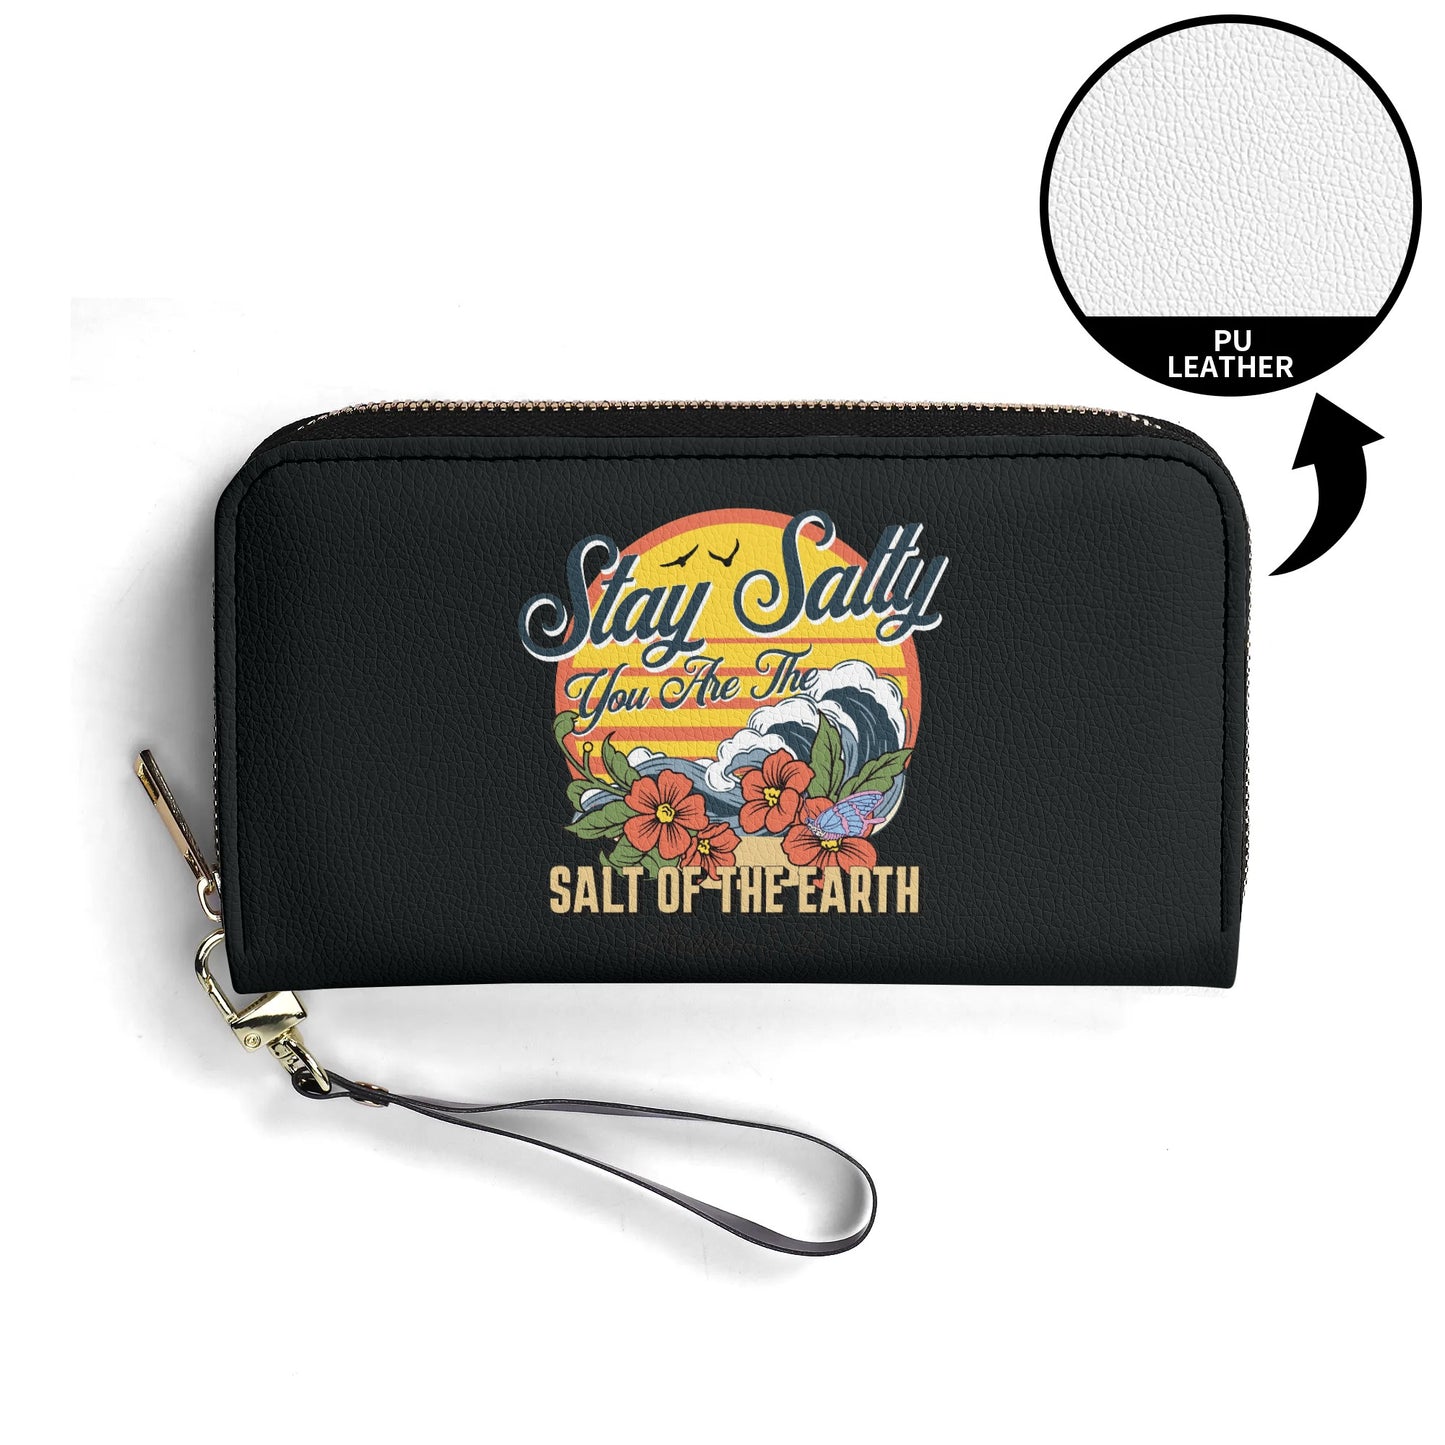 Stay Salty You Are The Salt Of The Earth PU Leather Womens Christian Wallet popcustoms